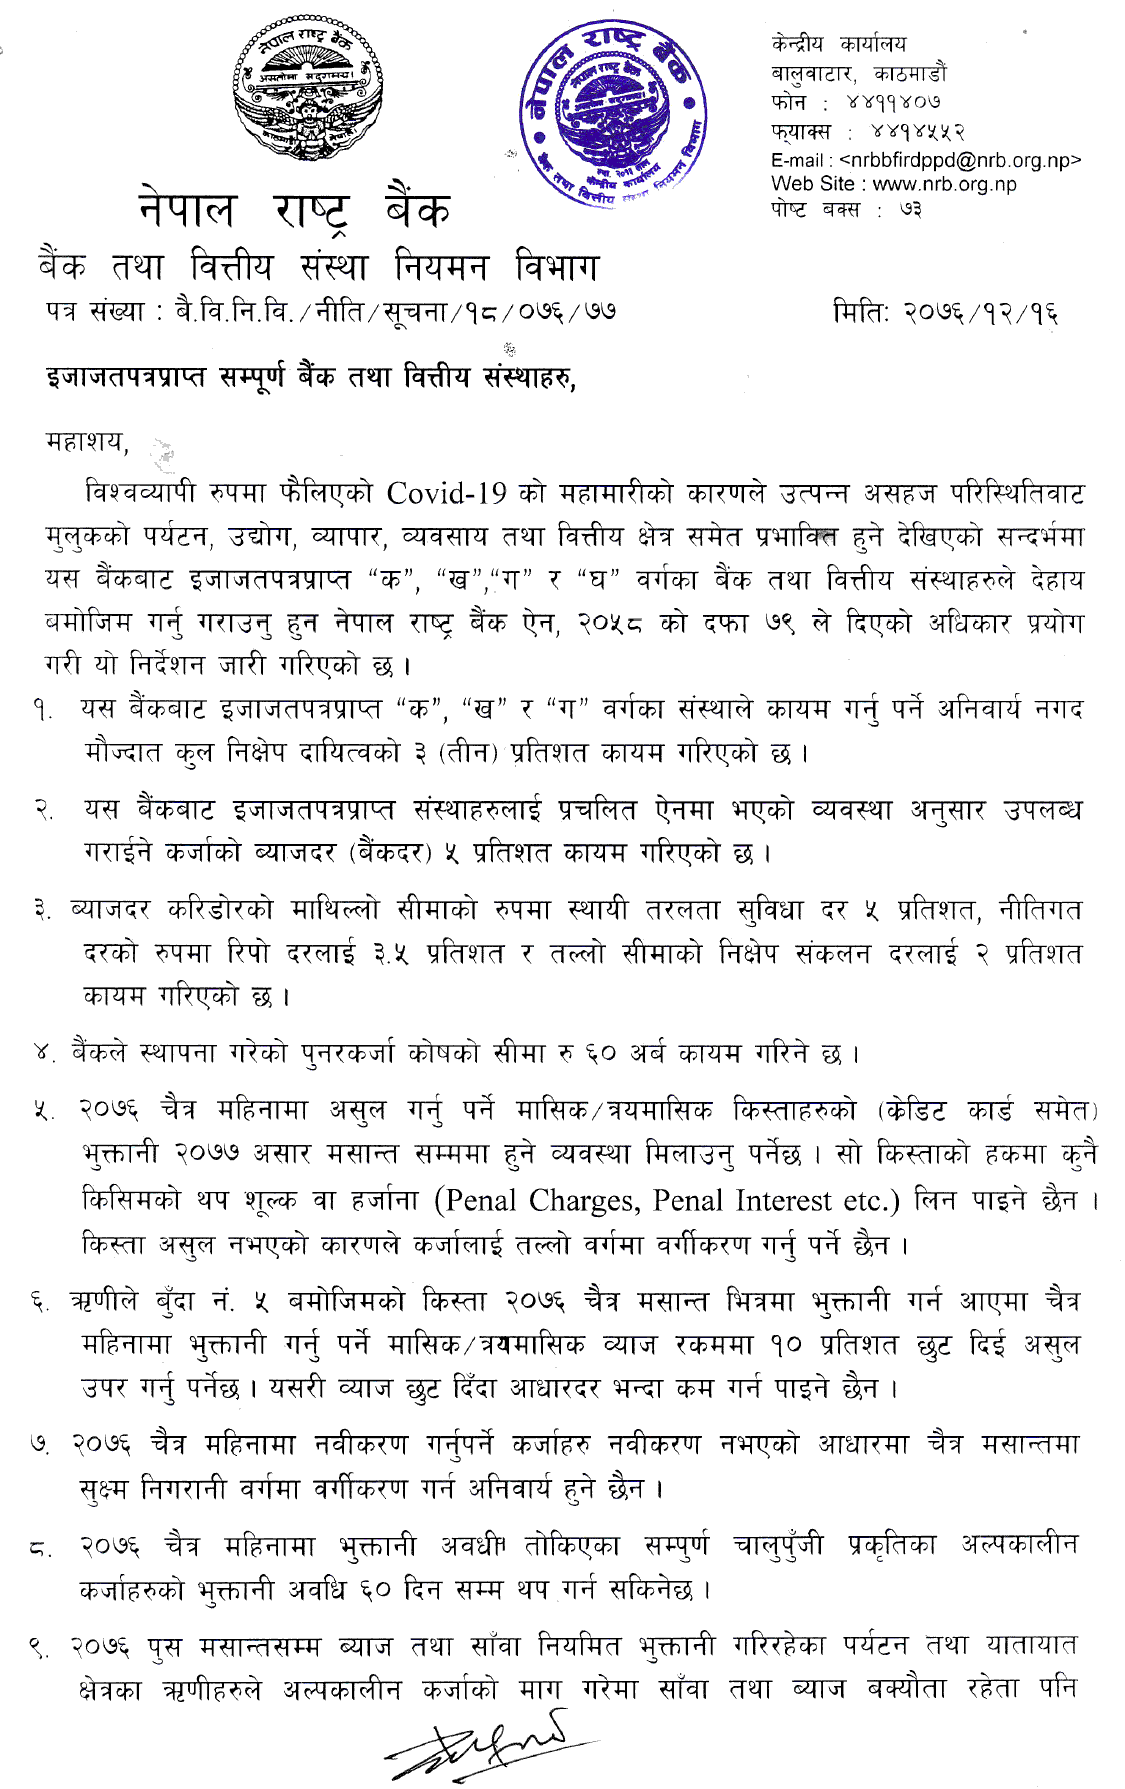 Important Notice from Nepal Rastra Bank